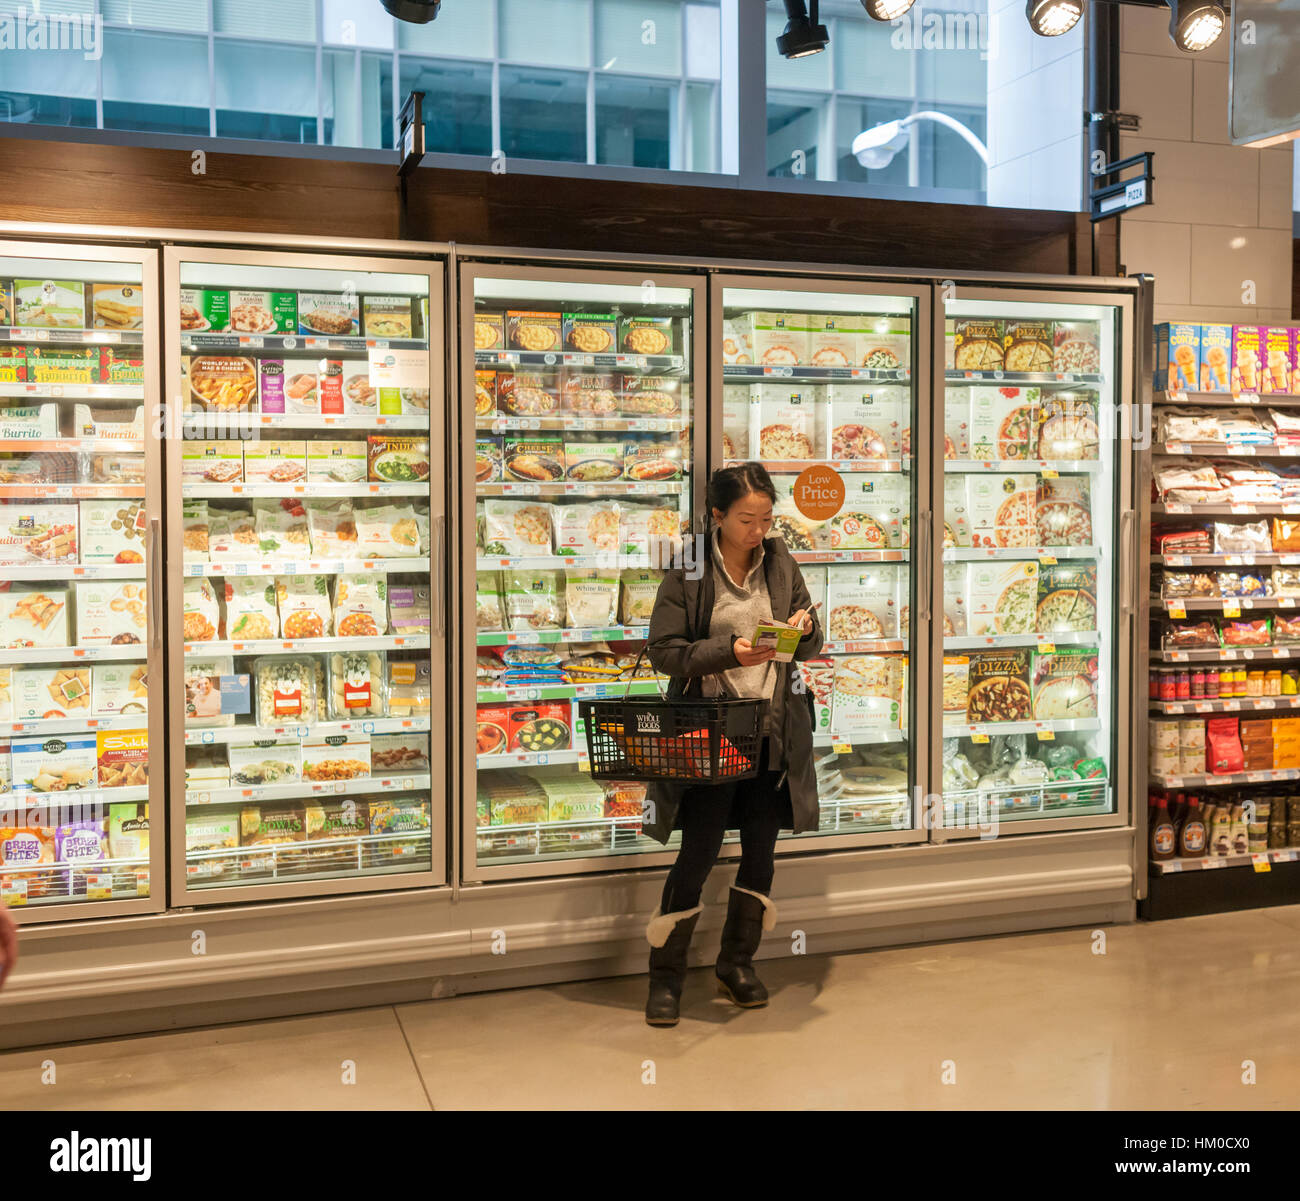 https://c8.alamy.com/comp/HM0CX0/shoppers-in-the-new-whole-foods-market-opposite-bryant-park-in-new-HM0CX0.jpg